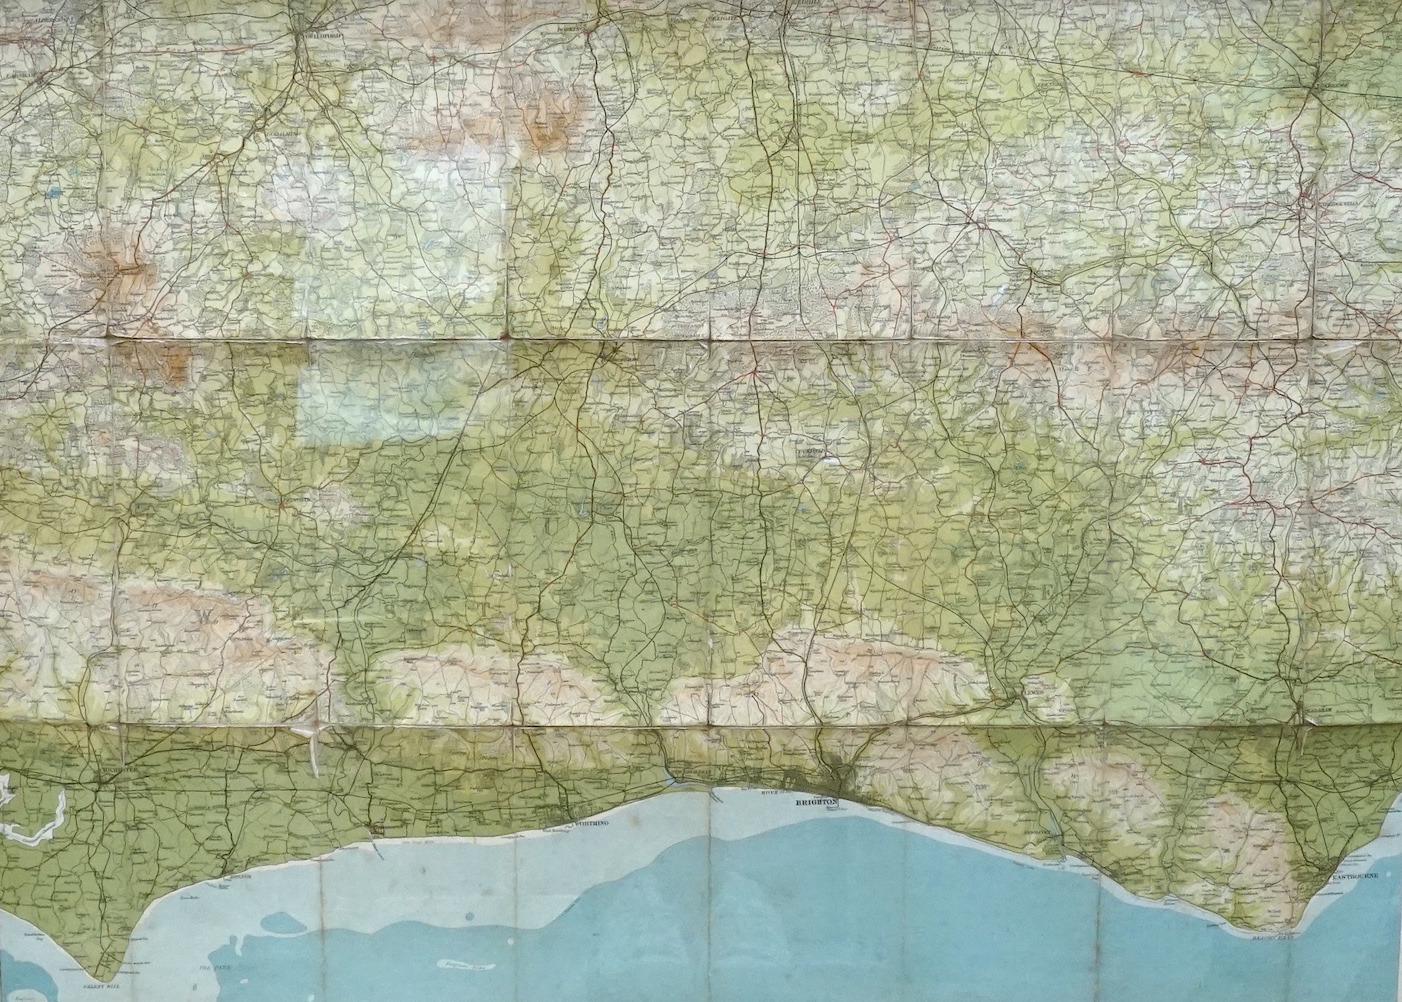 John Bartholomew's New Reduced Survey, coloured engraving, ½ inch to mile map of England and Wales - Sussex, 54 x 73cm